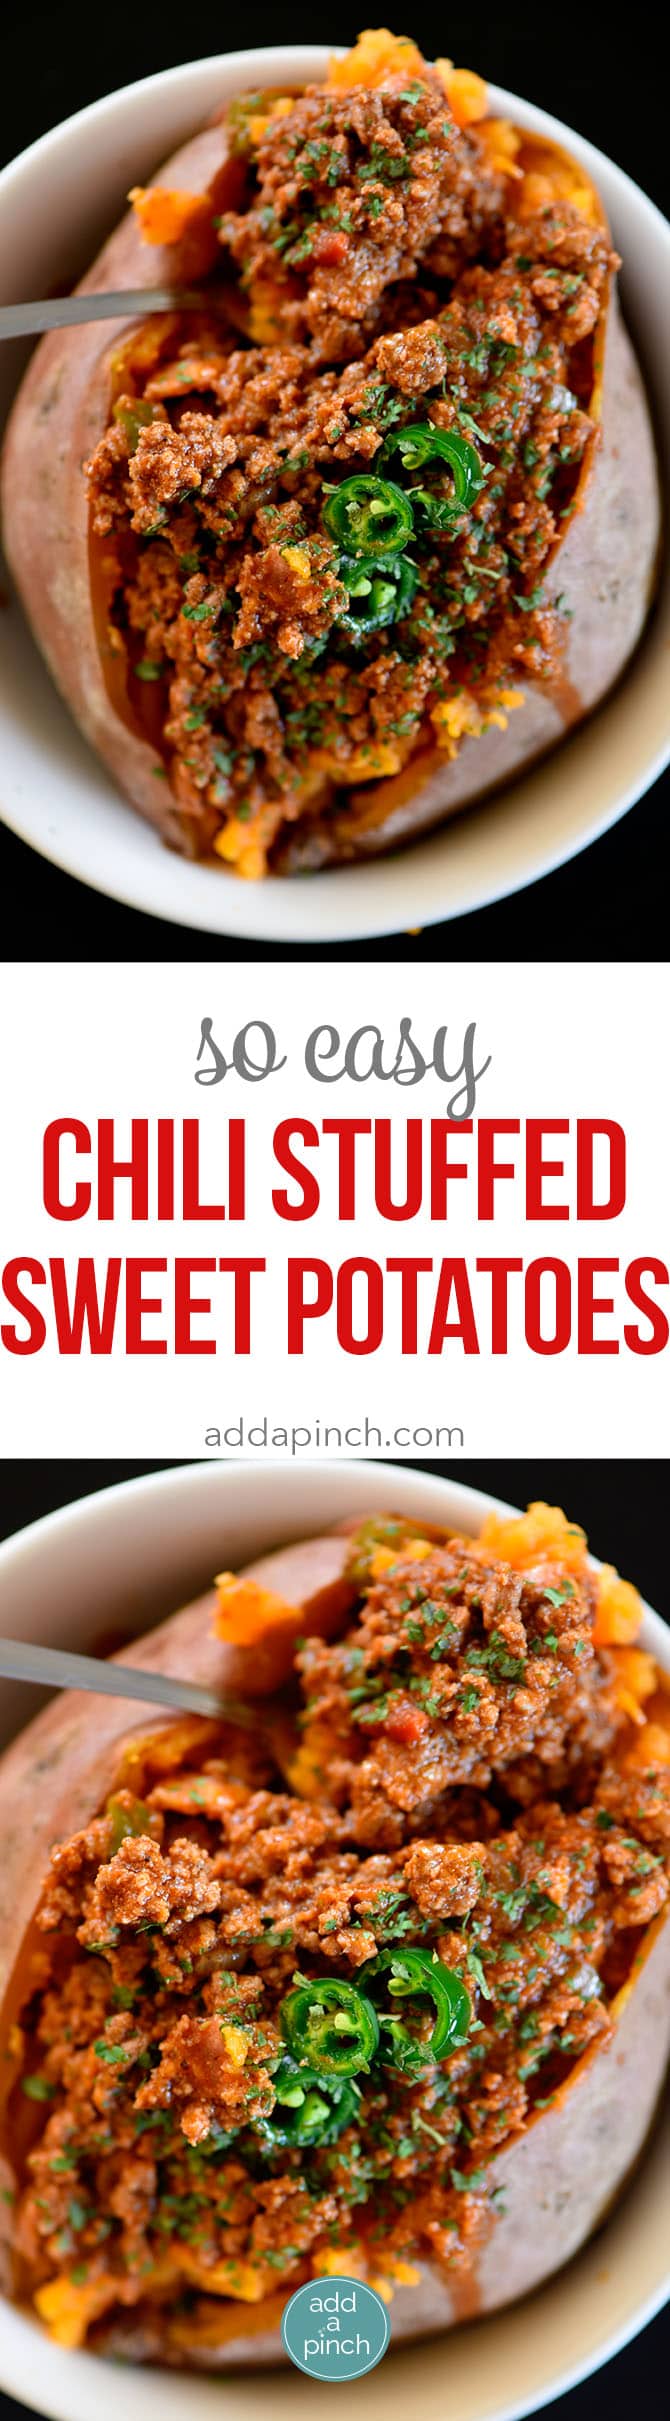 Chili Stuffed Sweet Potatoes Recipe - Chili Stuffed Sweet Potatoes makes a quick and easy meal! Ready and on the table in 30 minutes or a great make-ahead meal for even easier weeknights! // addapinch.com